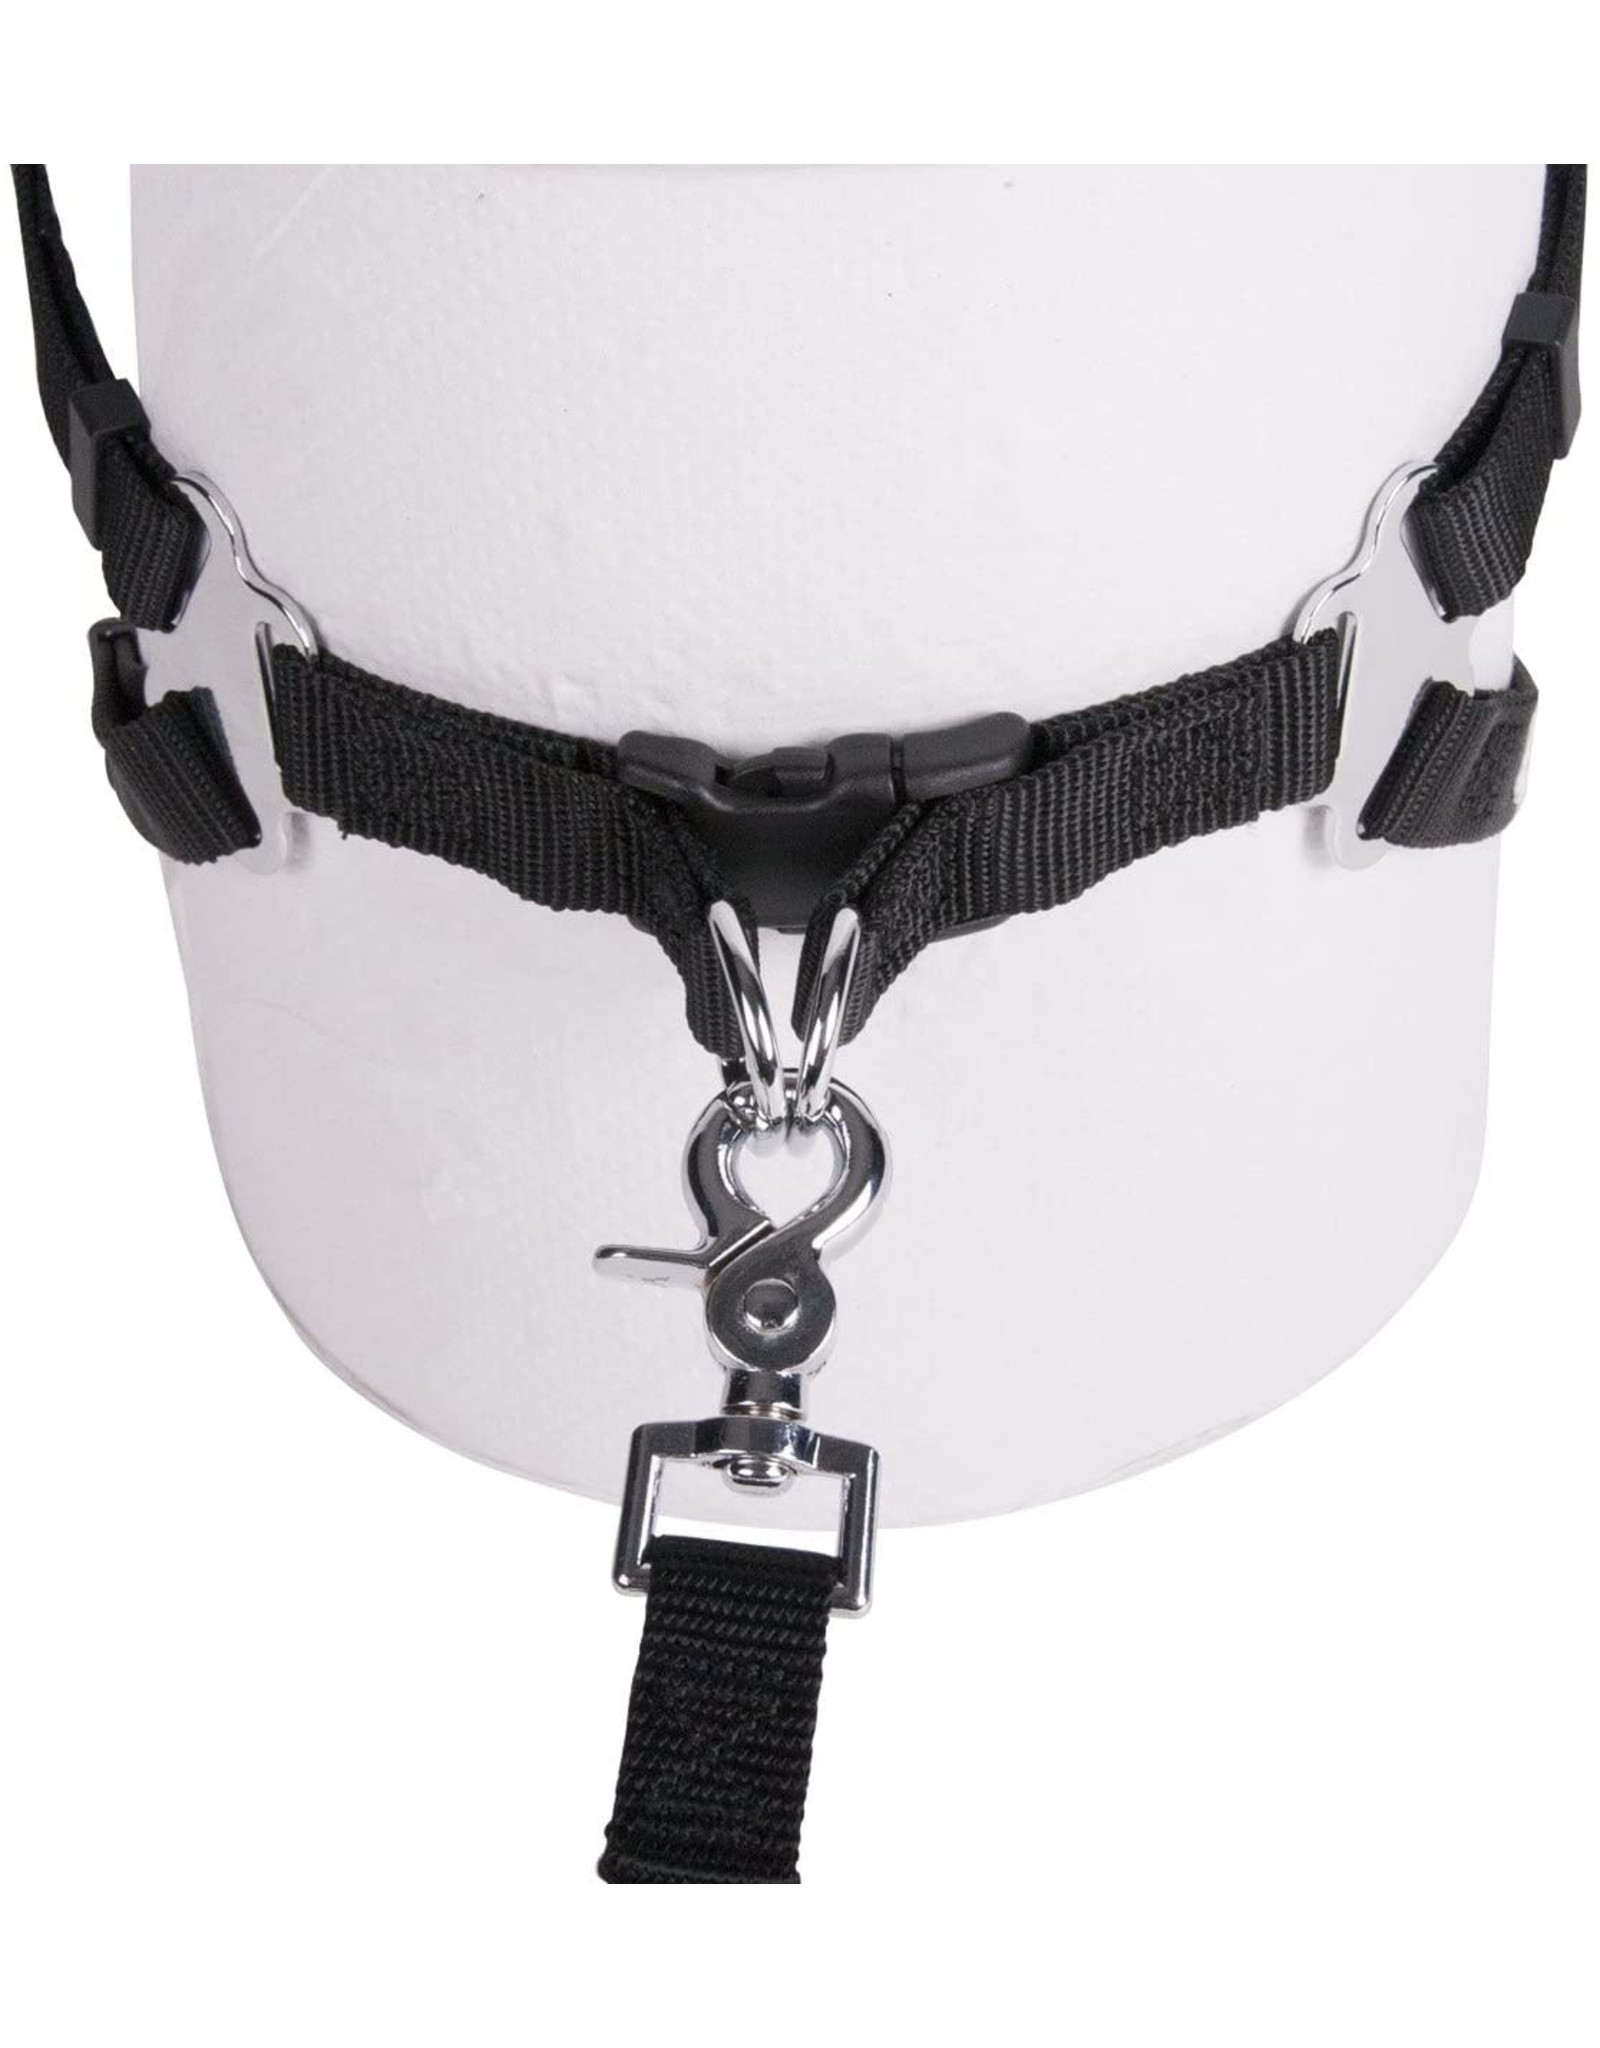 GoGo Pet Products GOGO BLACK NYLON COMFY HARNESS FOR DOGS